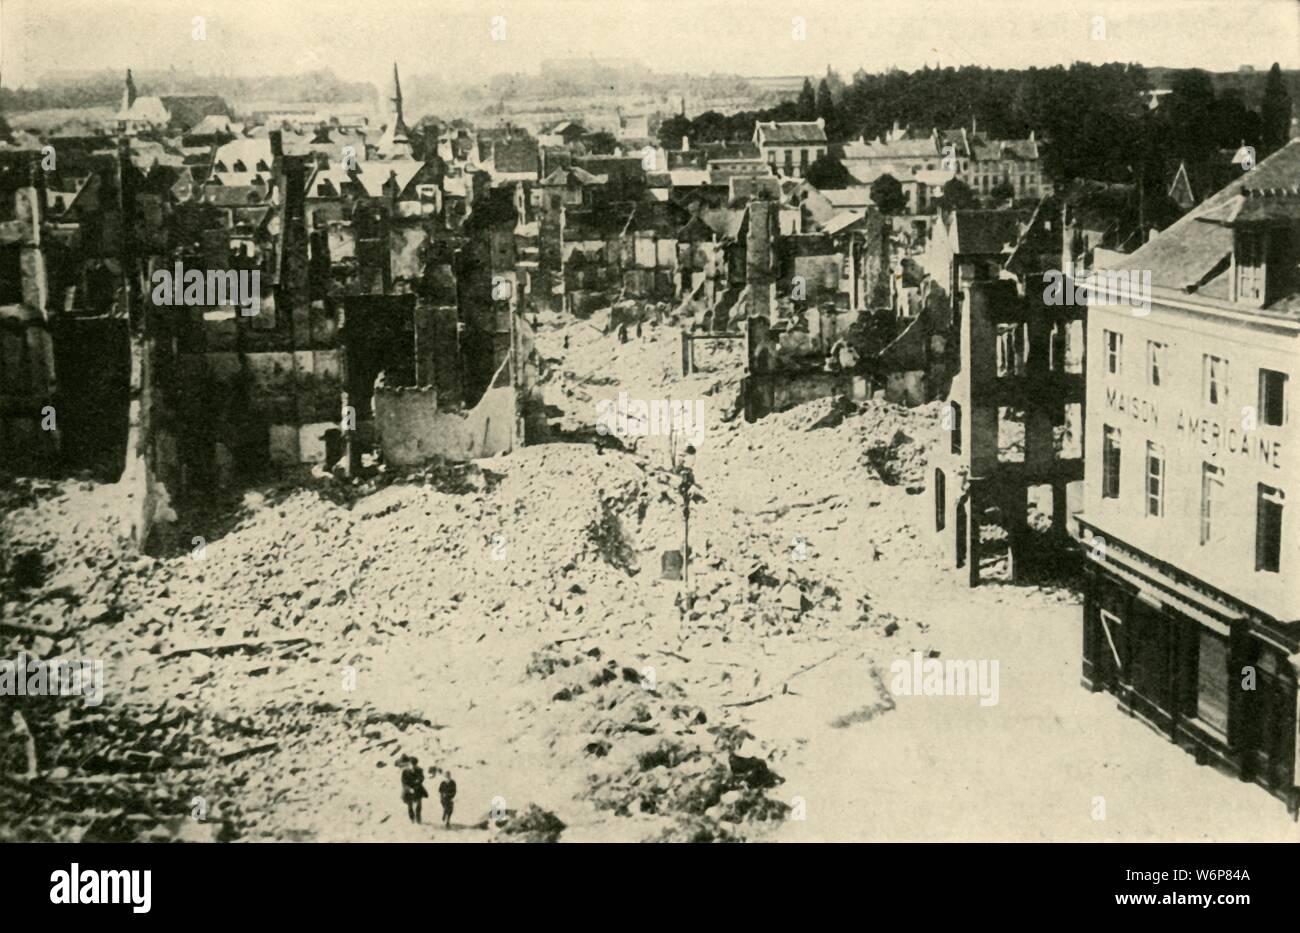 'Louvain after the German Bombardment: one portion of the devastated town', c1914, (c1920). The town of Louvain in Belgium was attacked by German soldiers in August 1914, at the beginning of the First World War. 300 civilians lost their lives and the historic university library was destroyed. From &quot;The Great World War - A History&quot; Volume I, edited by Frank A Mumby. [The Gresham Publishing Company Ltd, London, c1920] Stock Photo